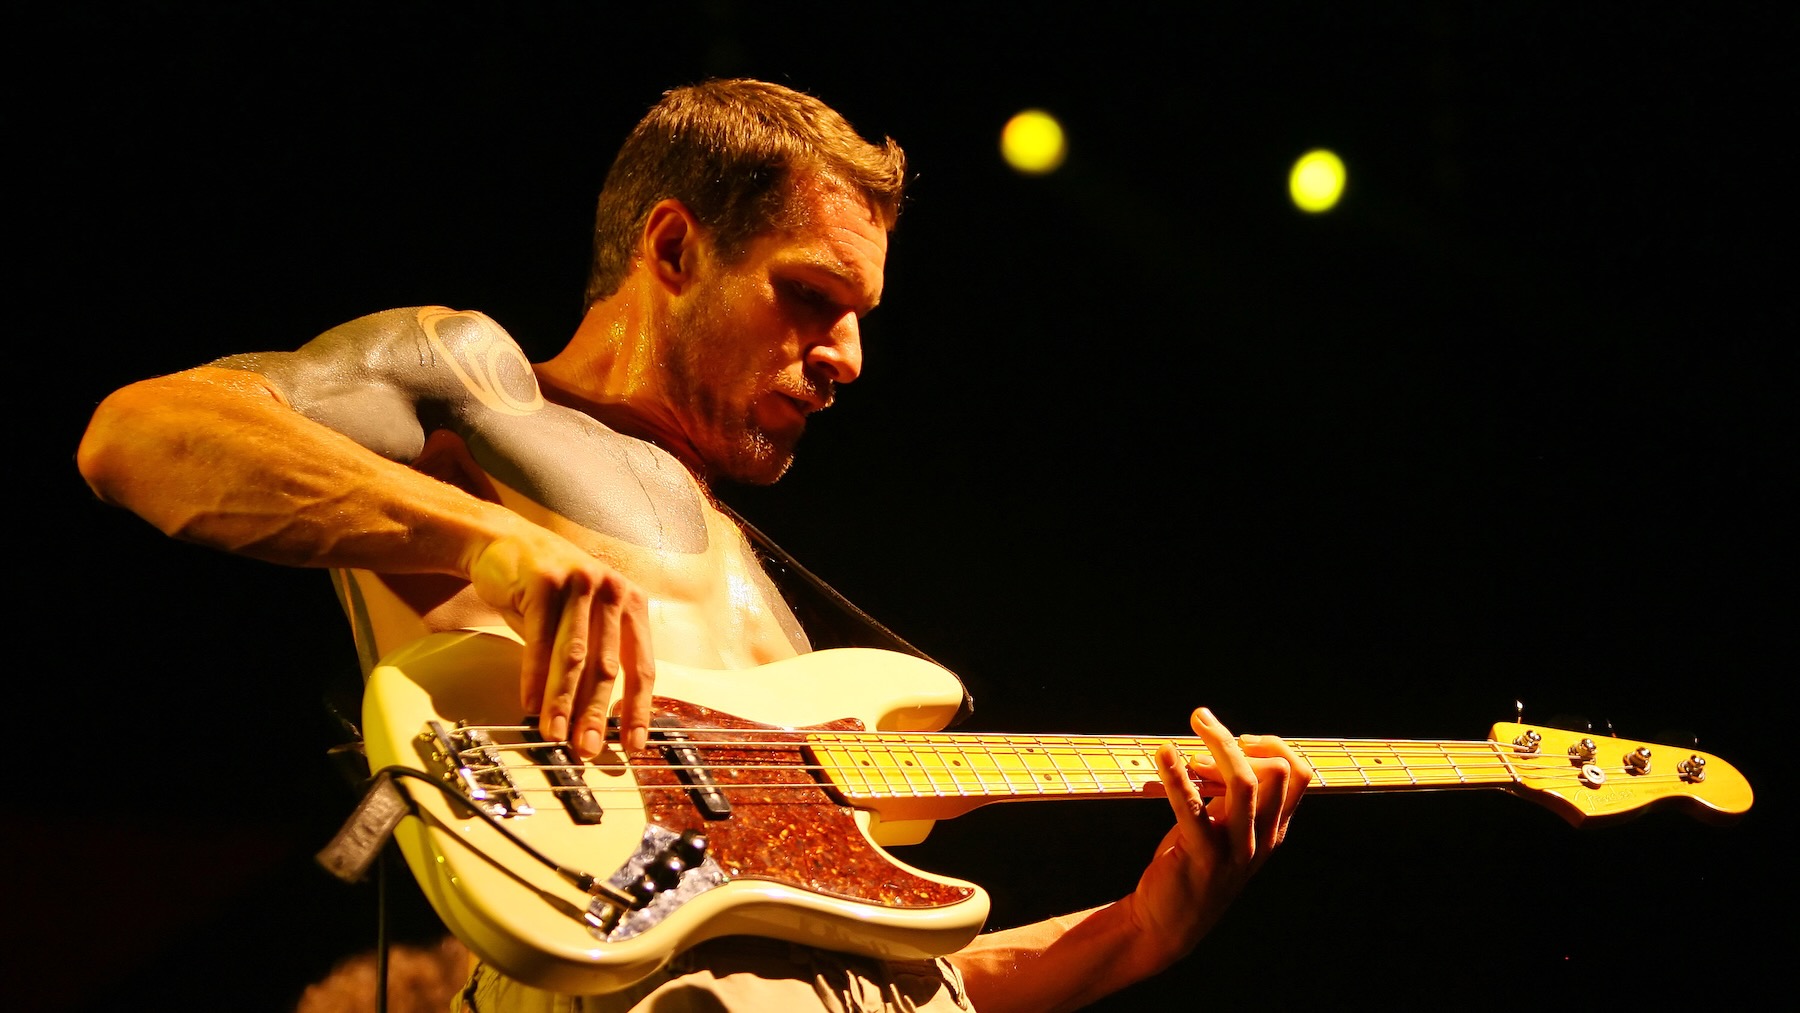 Tim Commerford on Rage Against the Machine’s Breakup: “I Don’t Know… I’m the Bass Player”